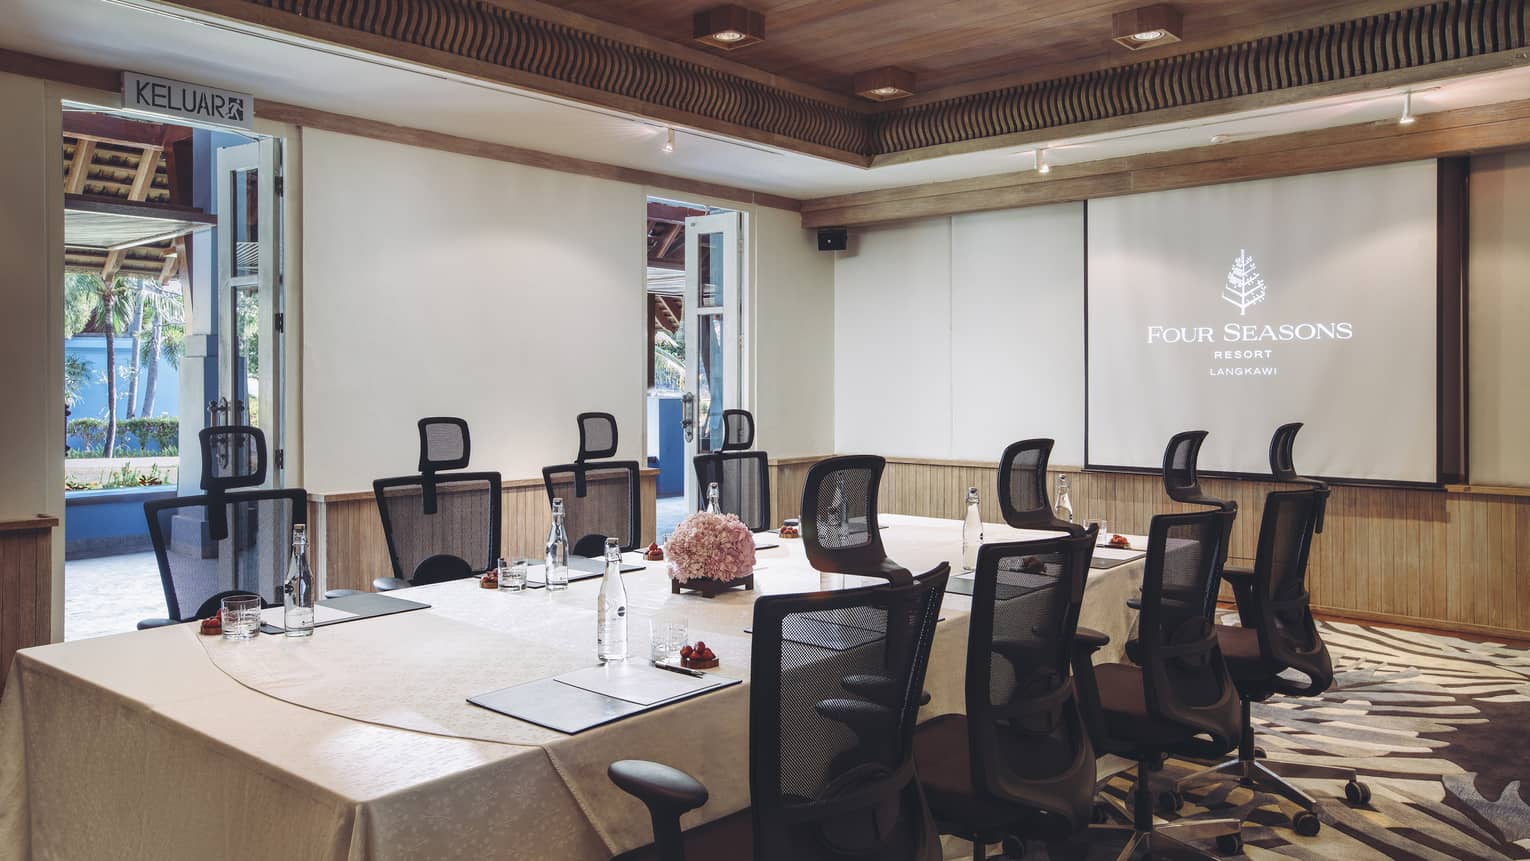 Meeting room with large rectangular table, 8 chairs and screen